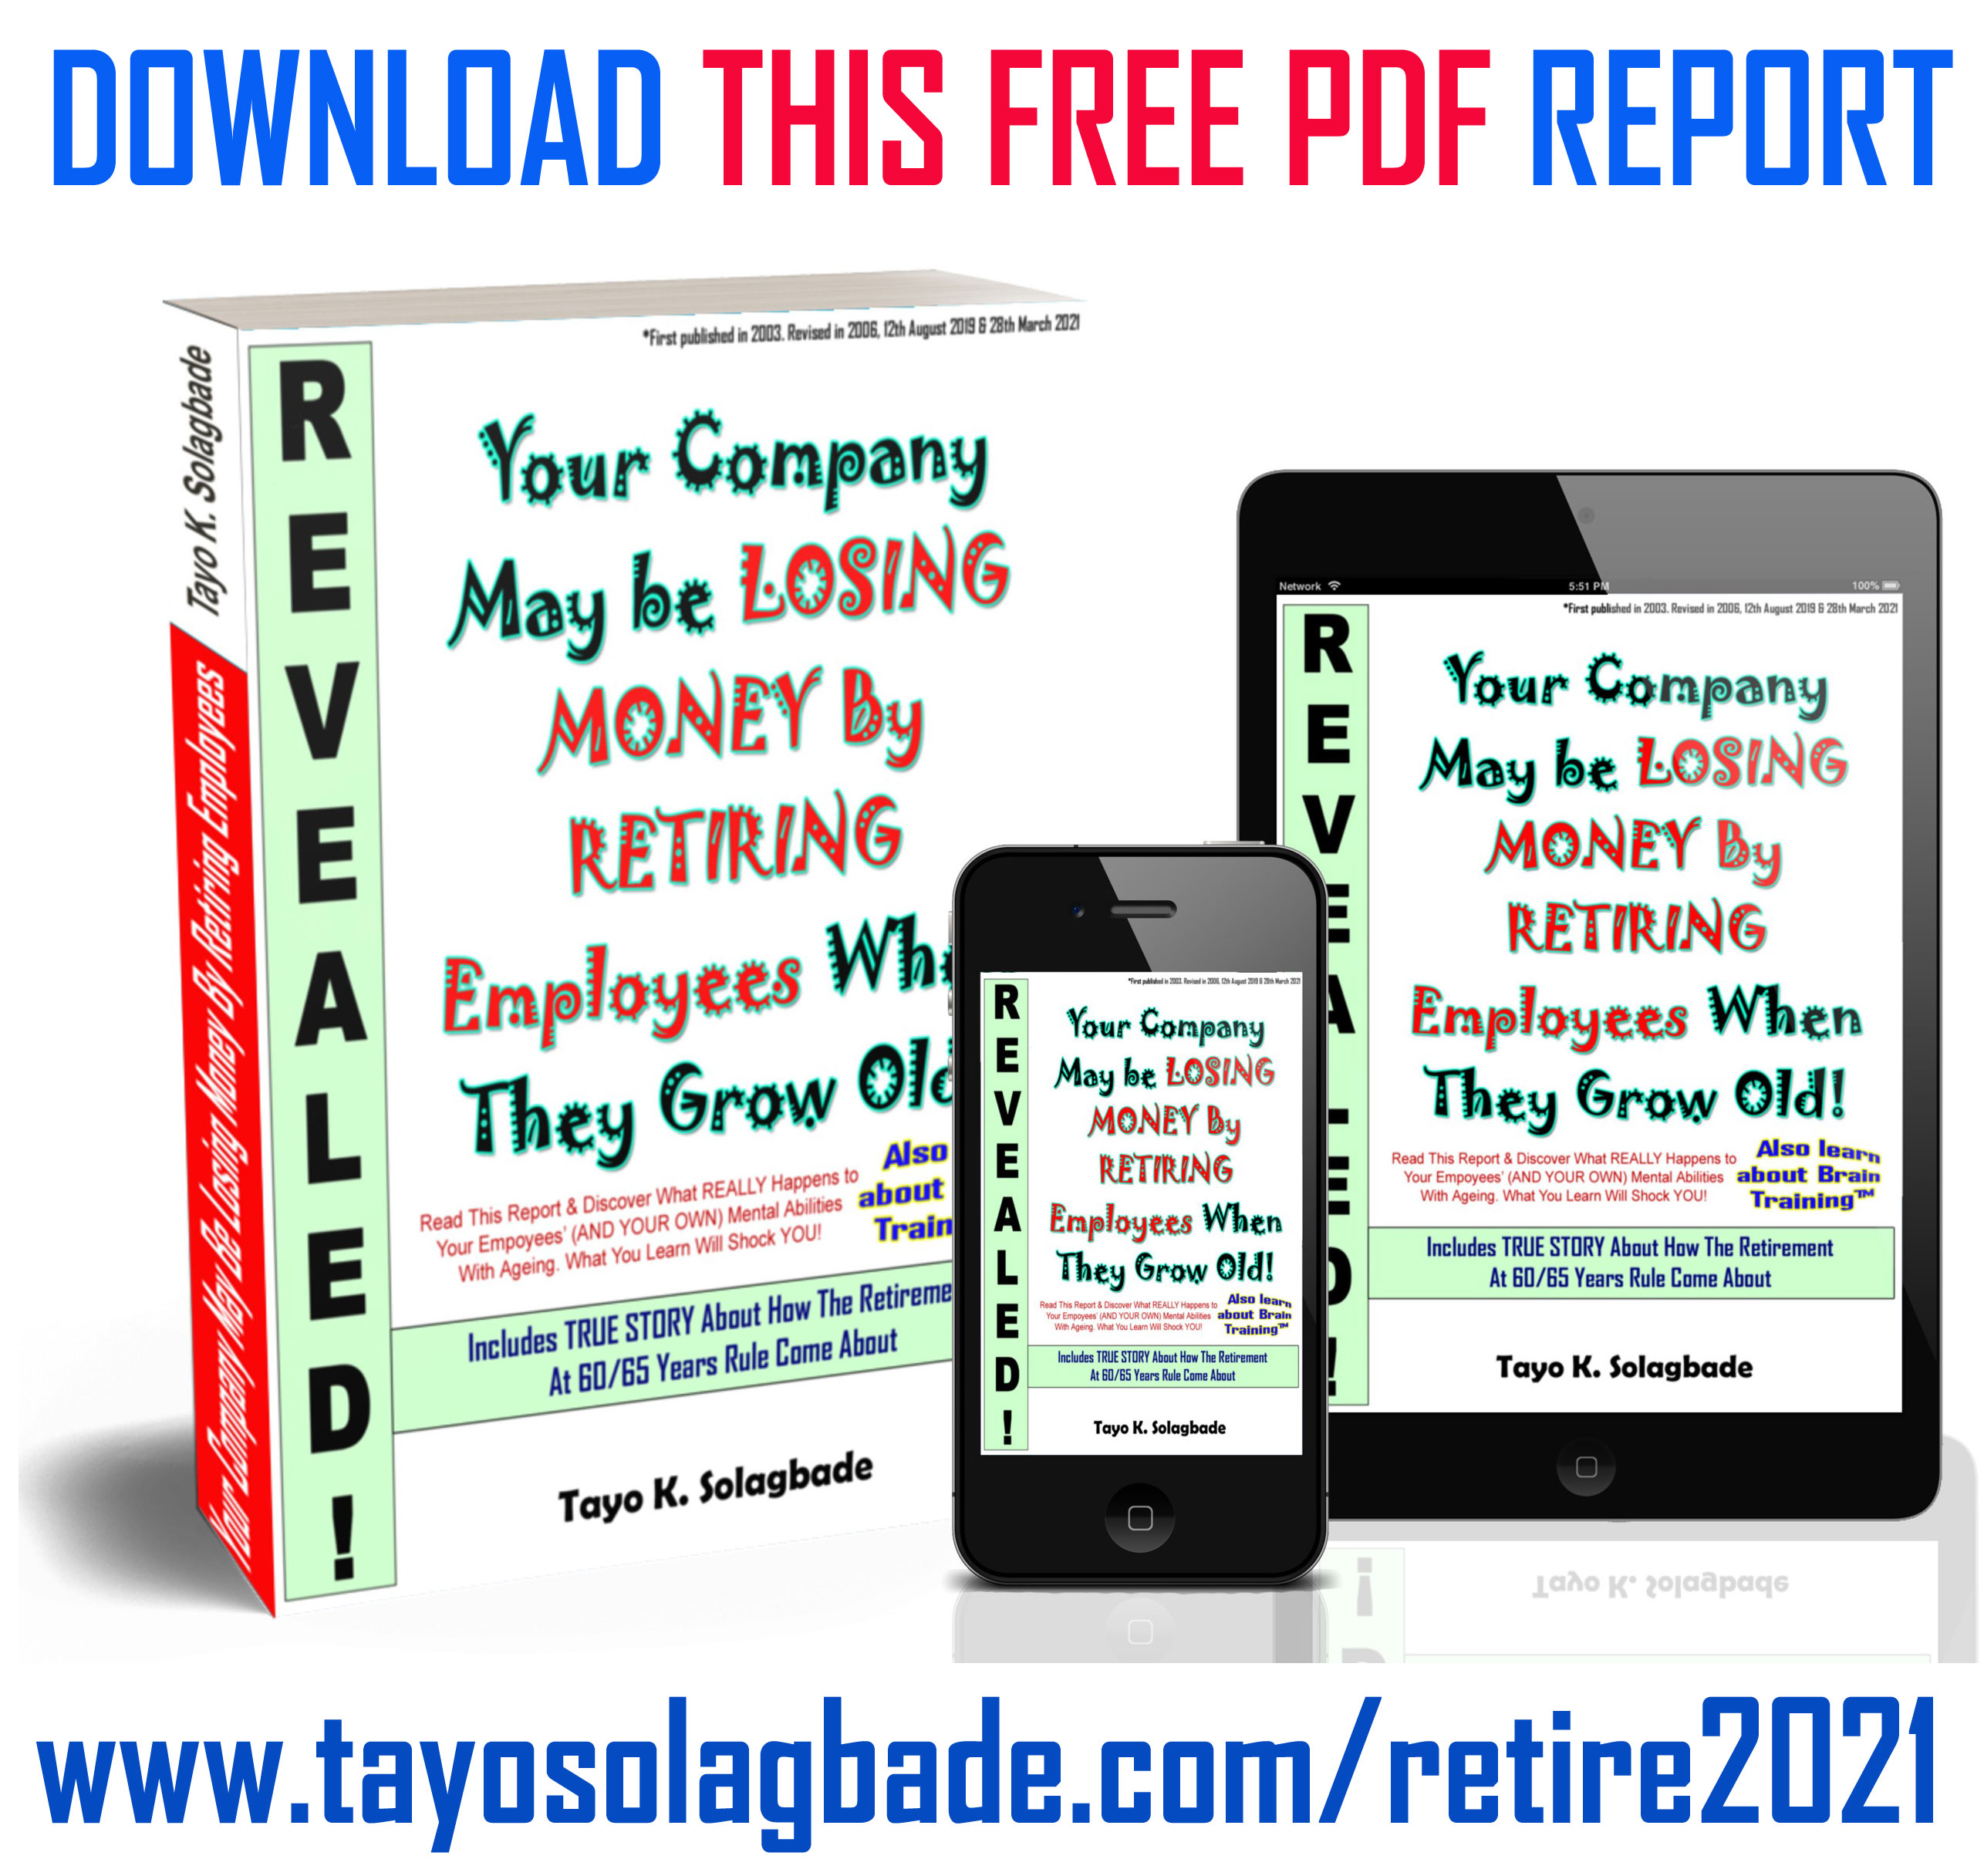 [PDF] Your Company May be LOSING MONEY By  RETIRING  Employees When They Grow Old!